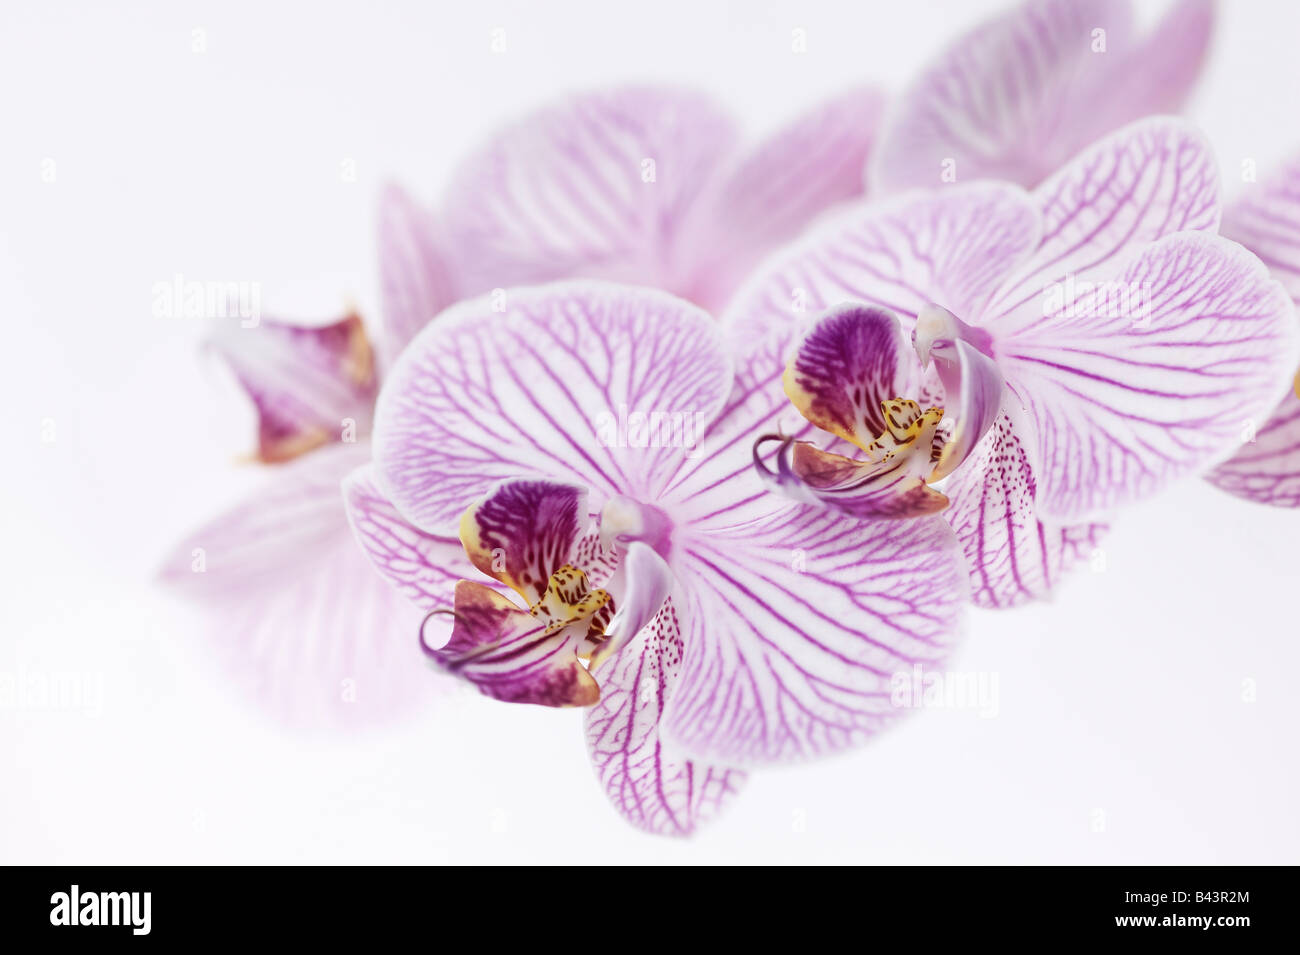 Pink and White Striped Phalaenopsis Orchid Flowers Stock Photo